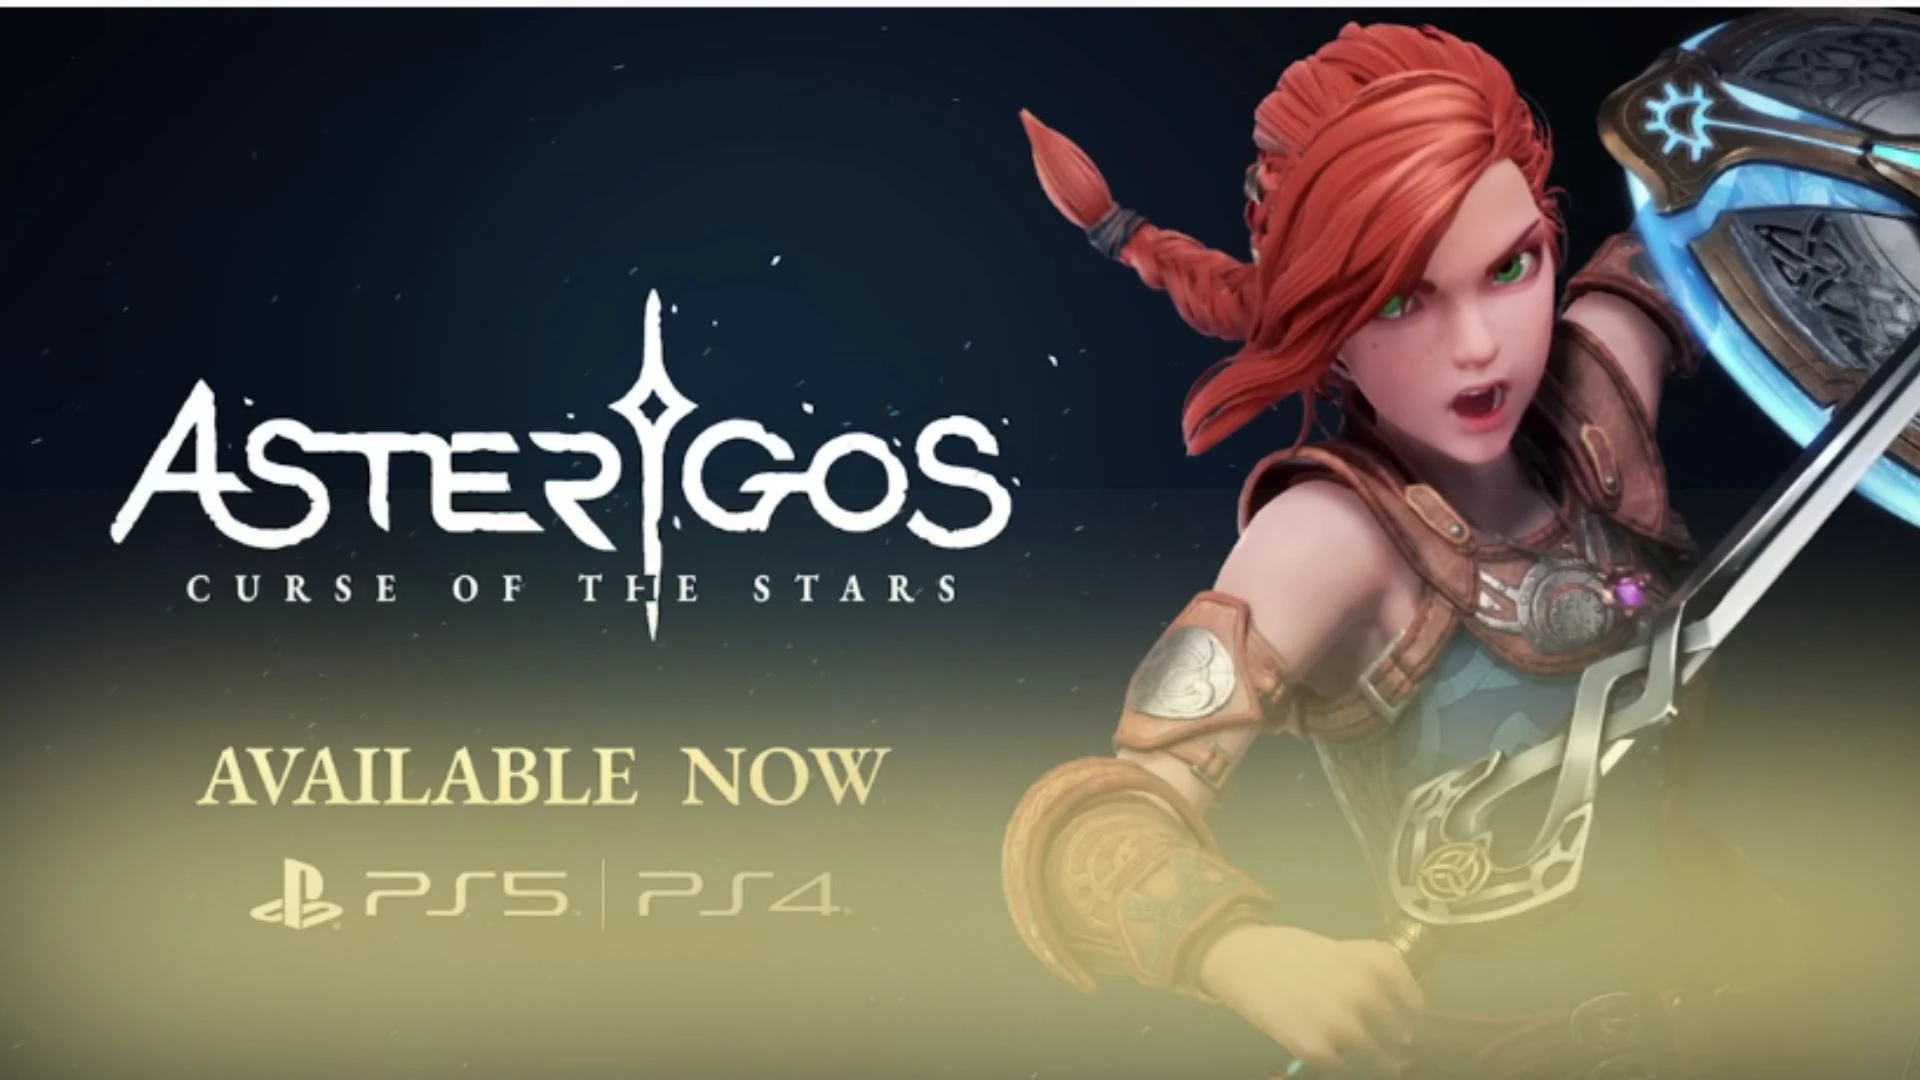 Asterigos: Curse of the Stars Parents Guide (2022)